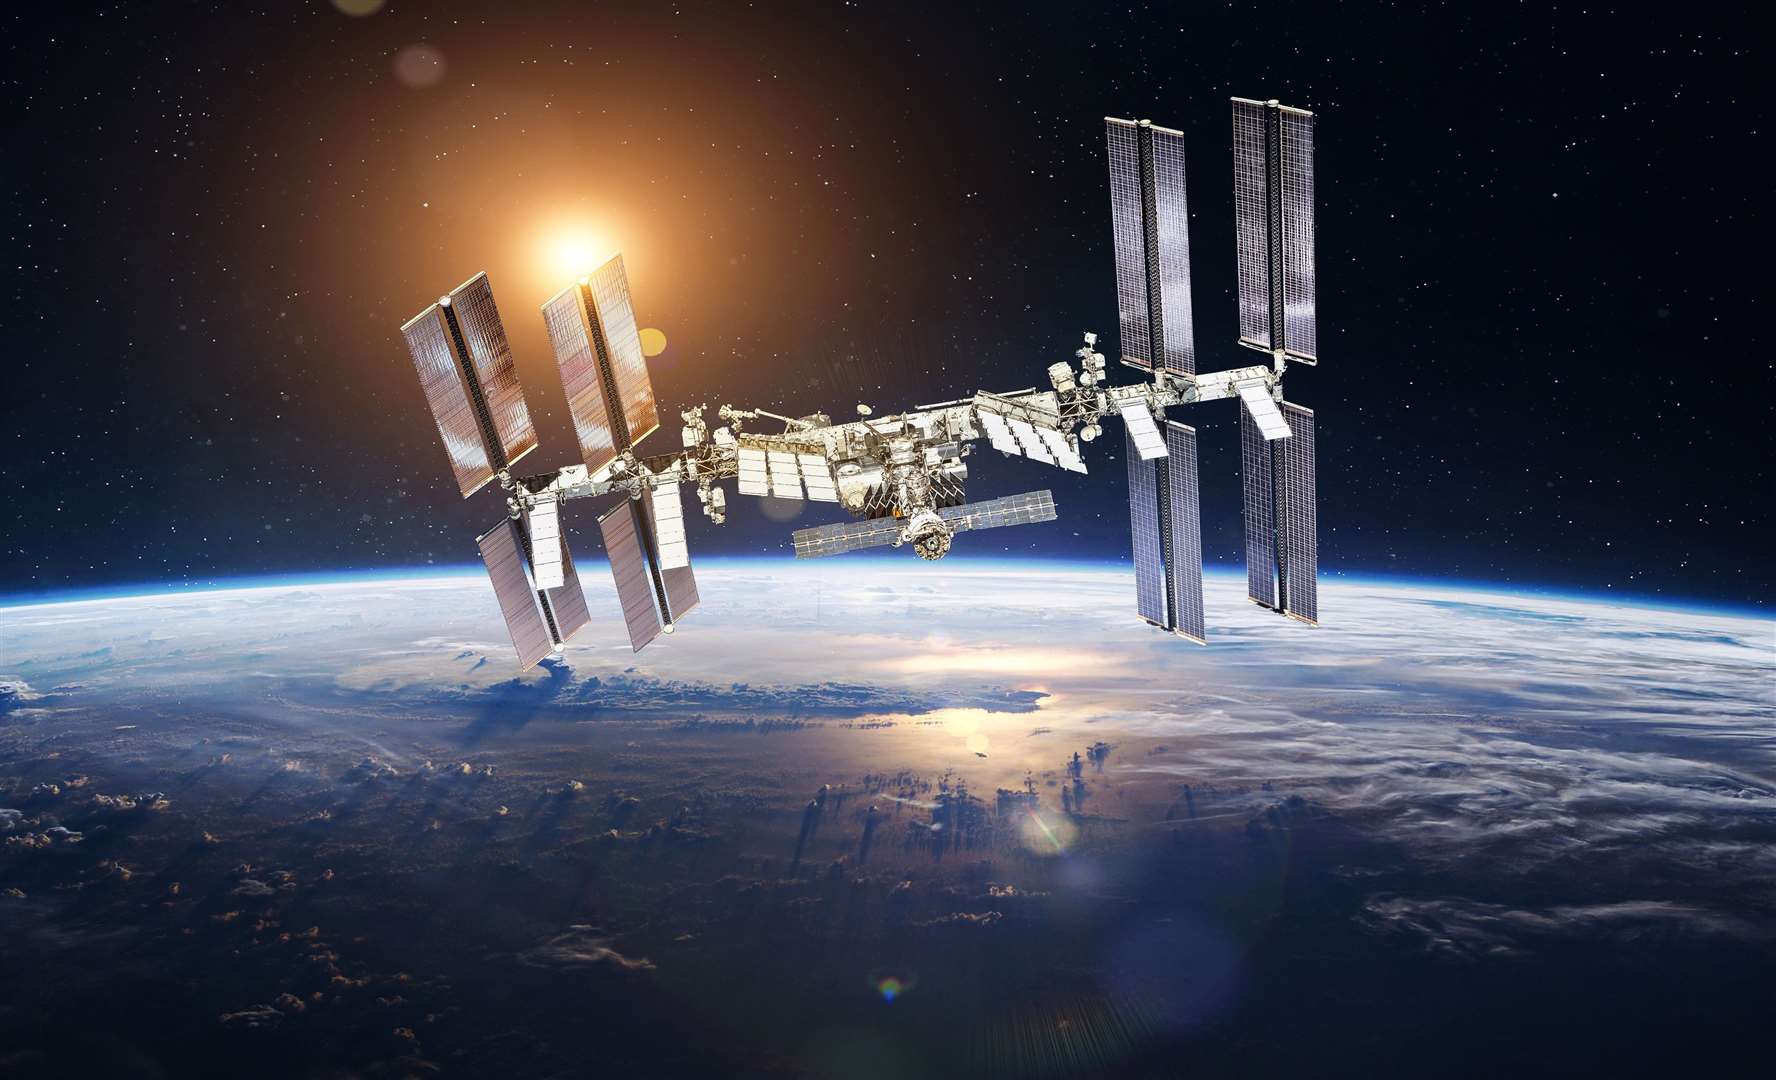 Space debris has put the ISS at risk again. Credit: NASA